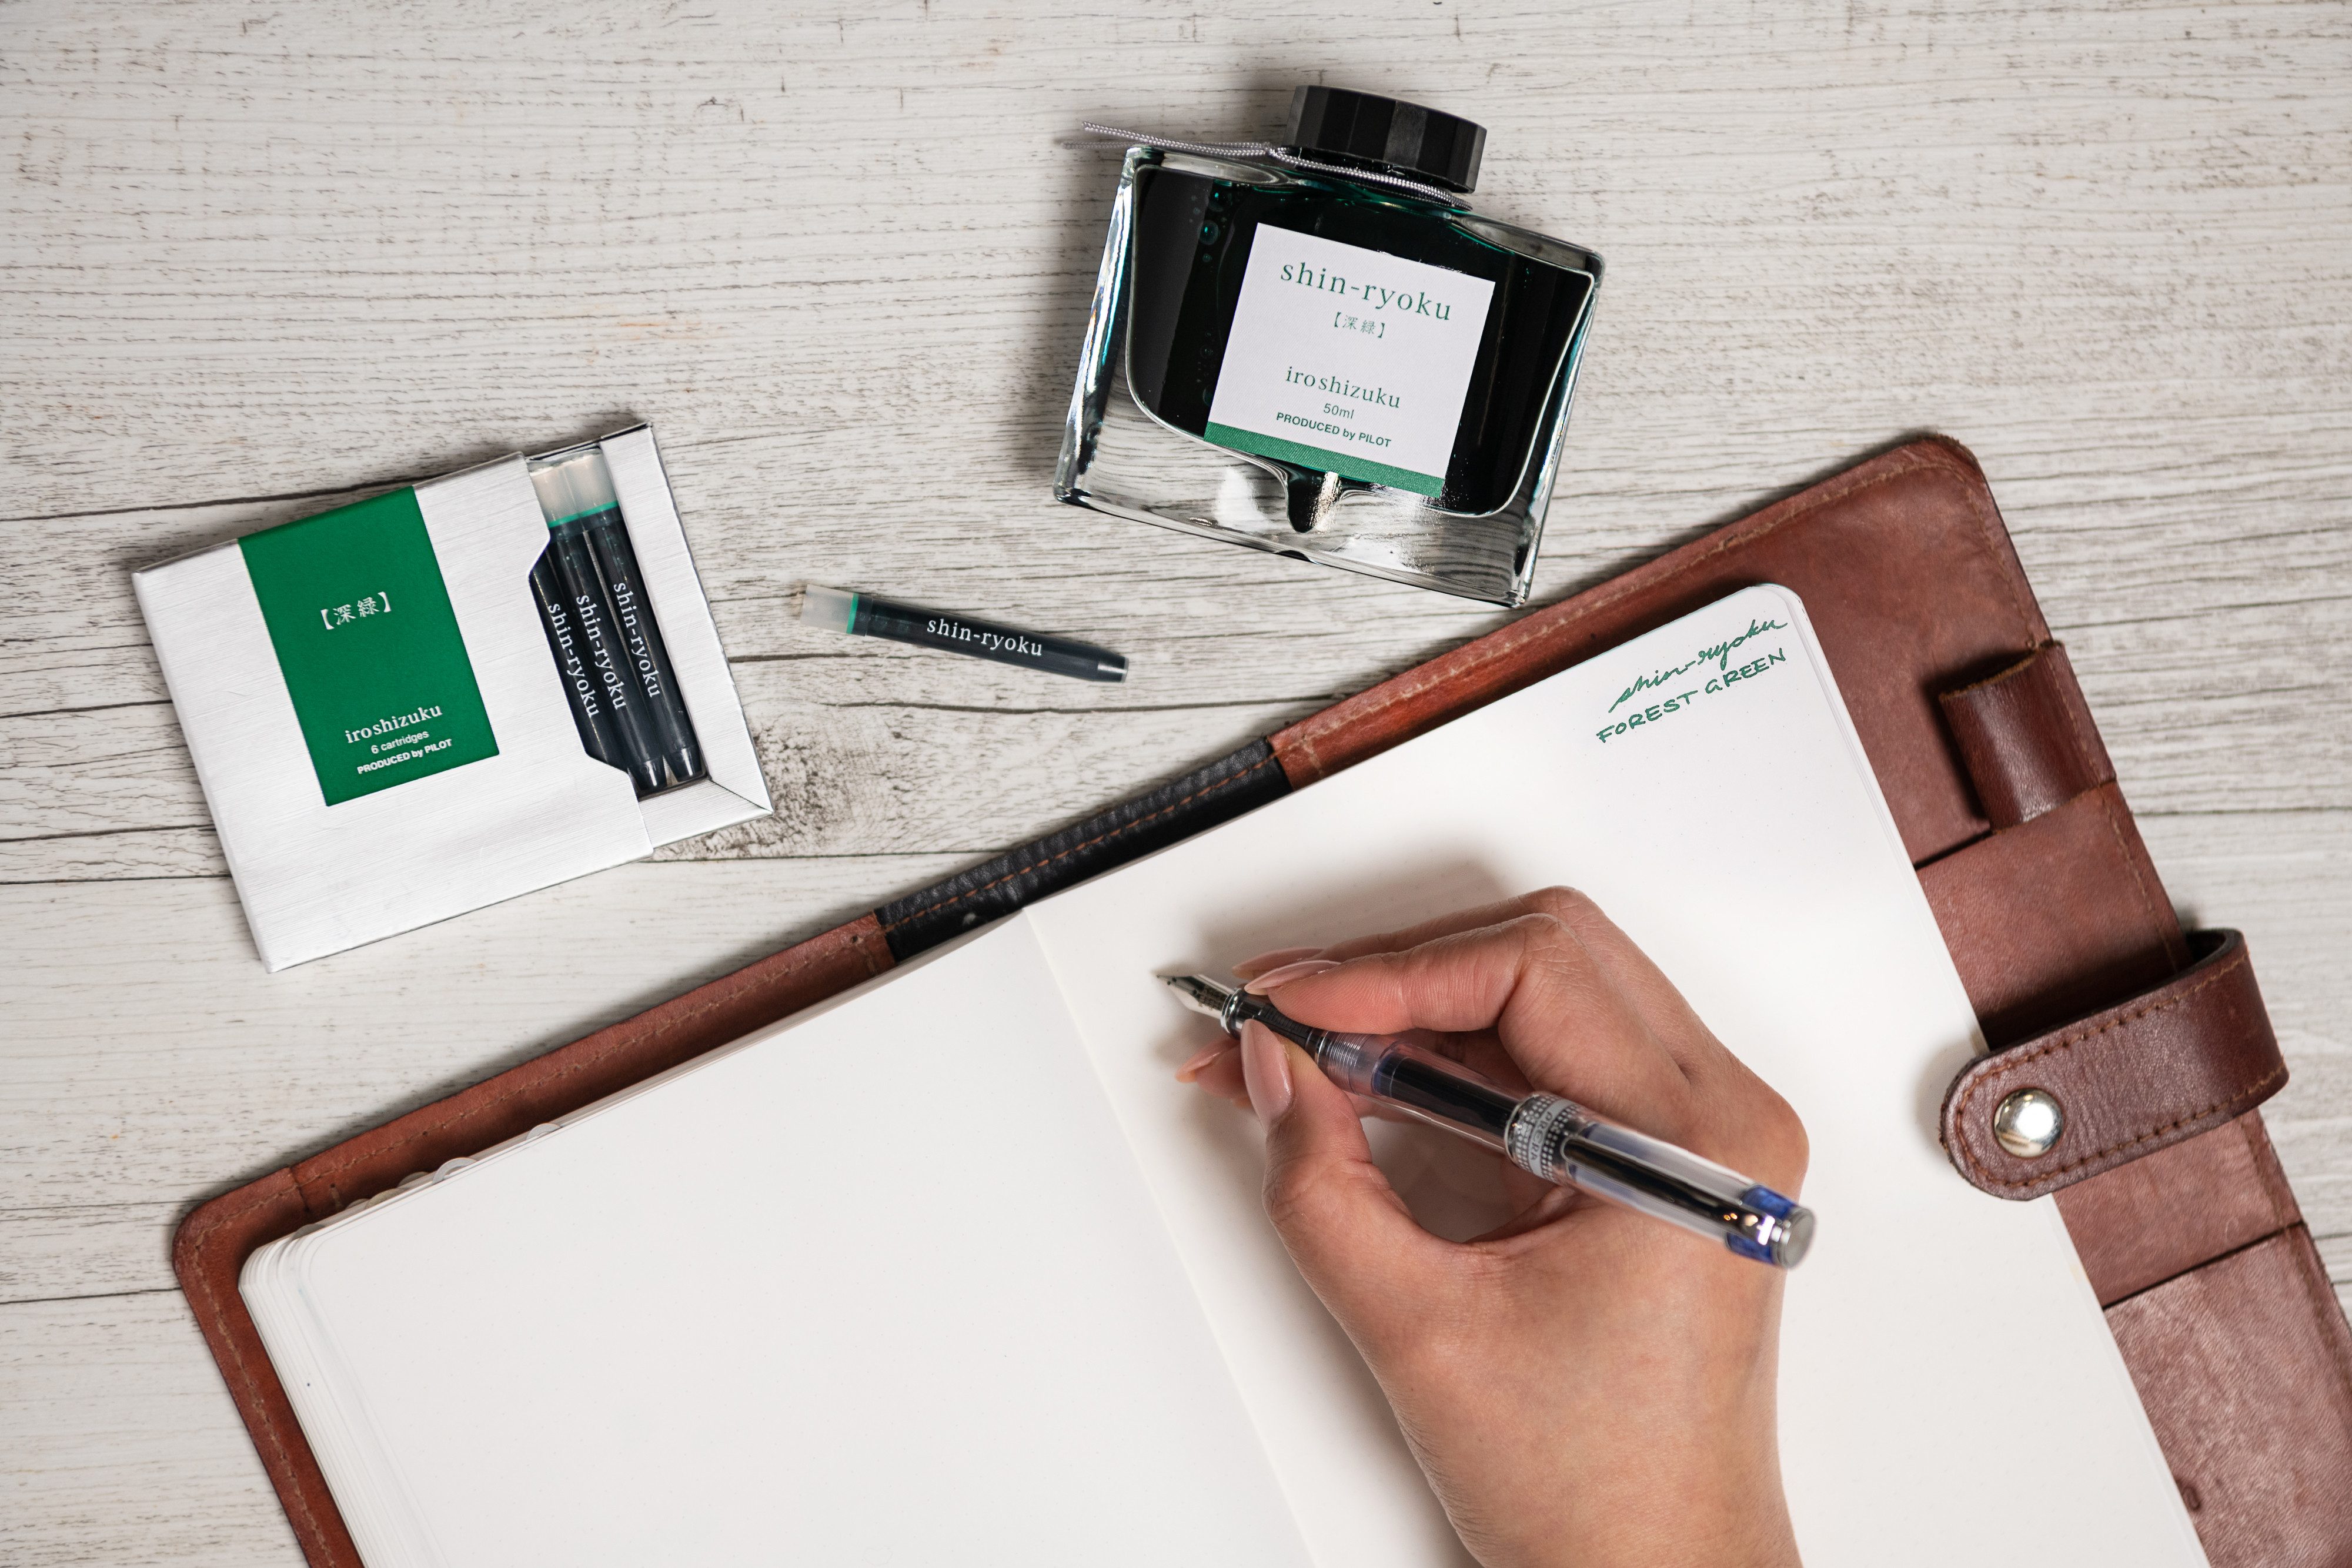 Pilot Prera Transparent fountain pen, writing in green using Pilot iroshizuku ink in shin-ryoku, which translates to Forest Green in Japanese. The person is writing on a blank page in a leather covered notebook, with a glass bottle of the iroshizuku ink, as well as a pack of iroshizuku ink cartridges.